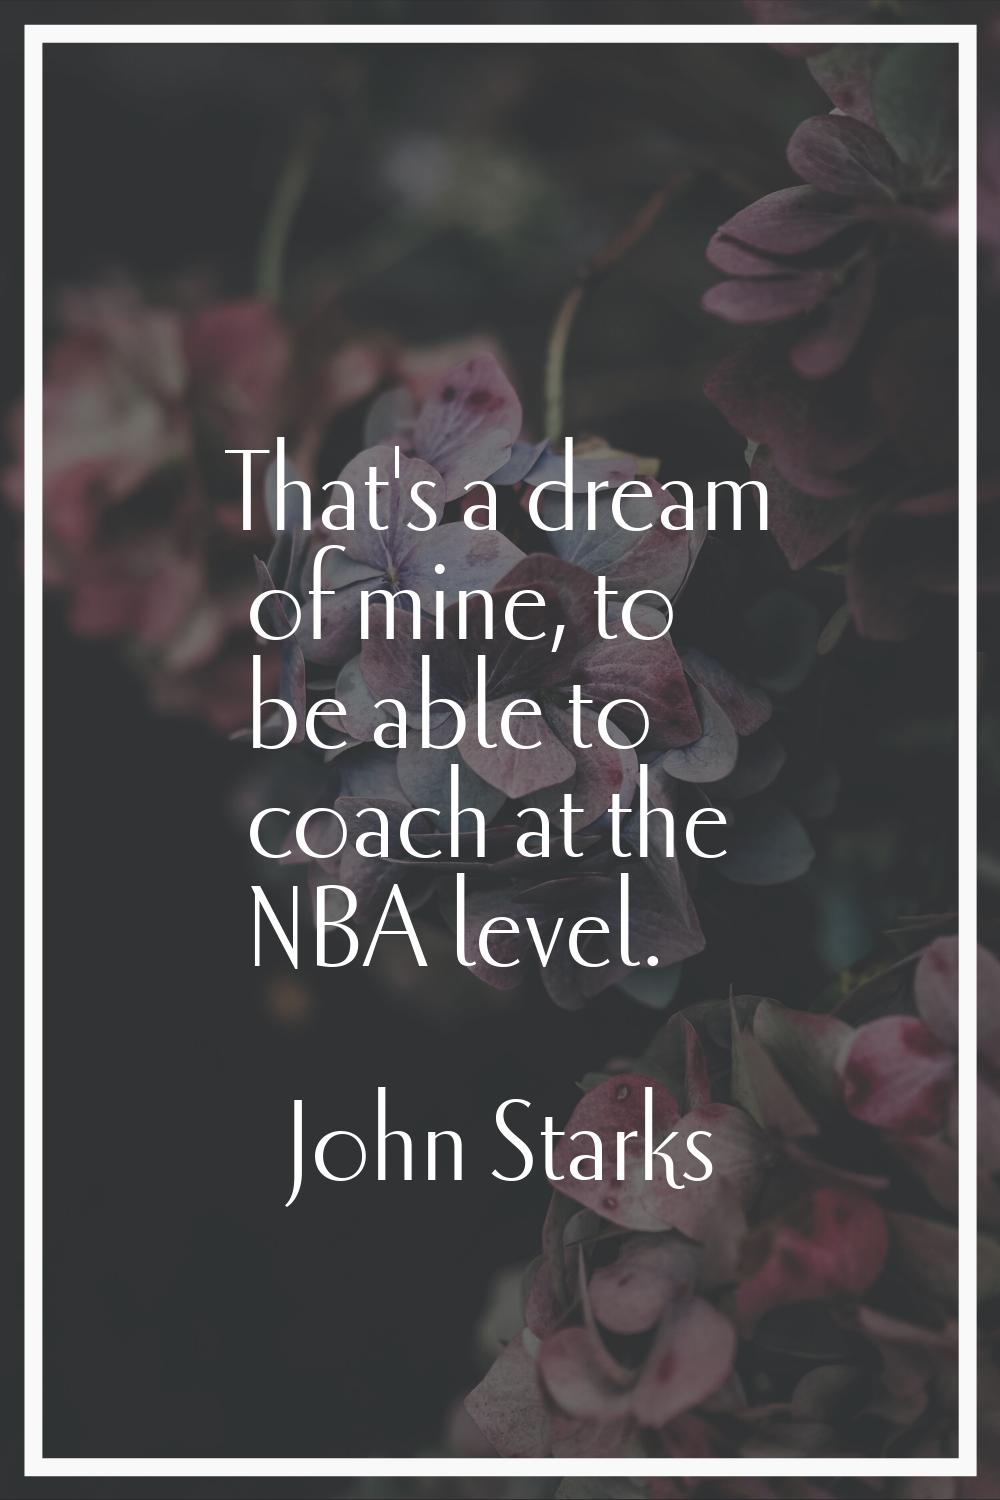 That's a dream of mine, to be able to coach at the NBA level.